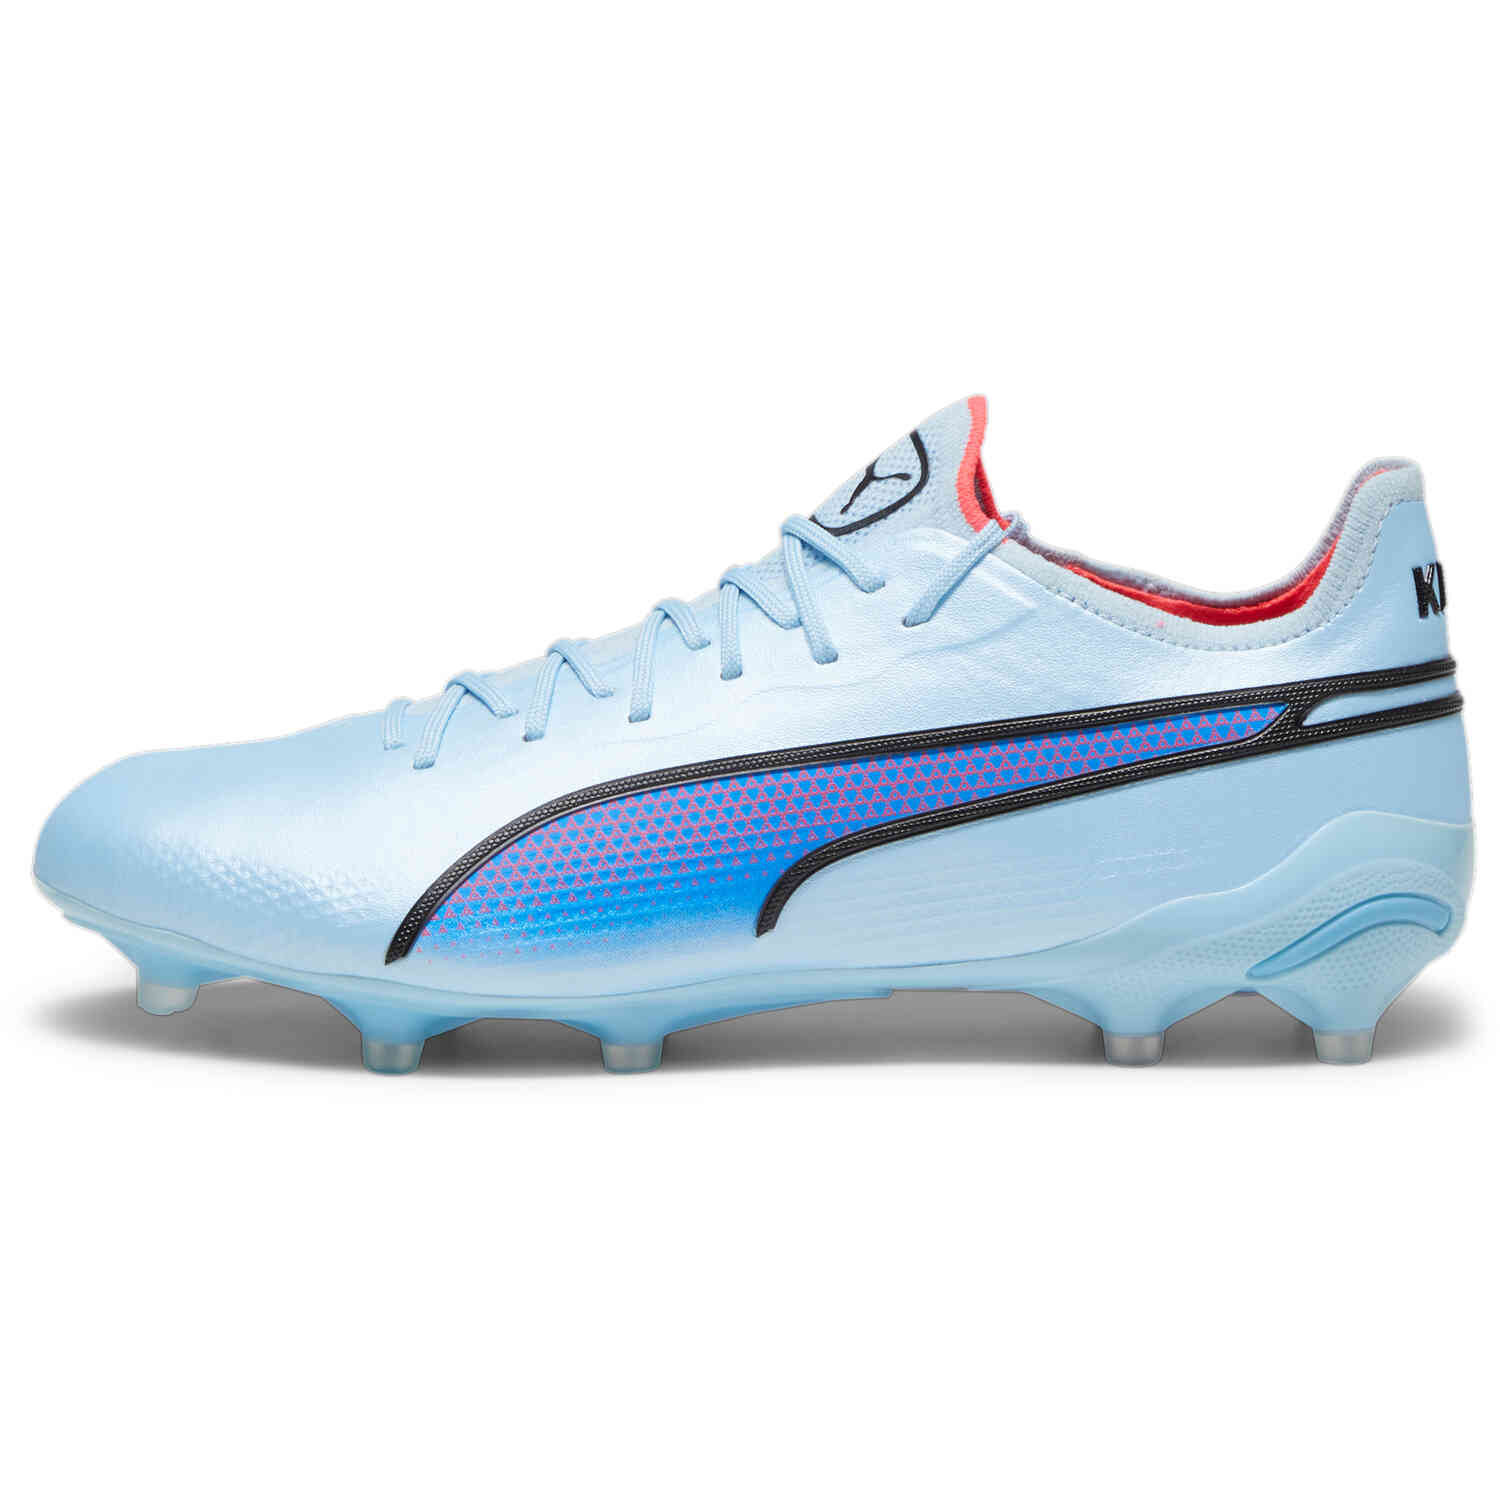 Puma King Ultimate FG - Silver Sky & Black with Fire Orchid - SoccerPro